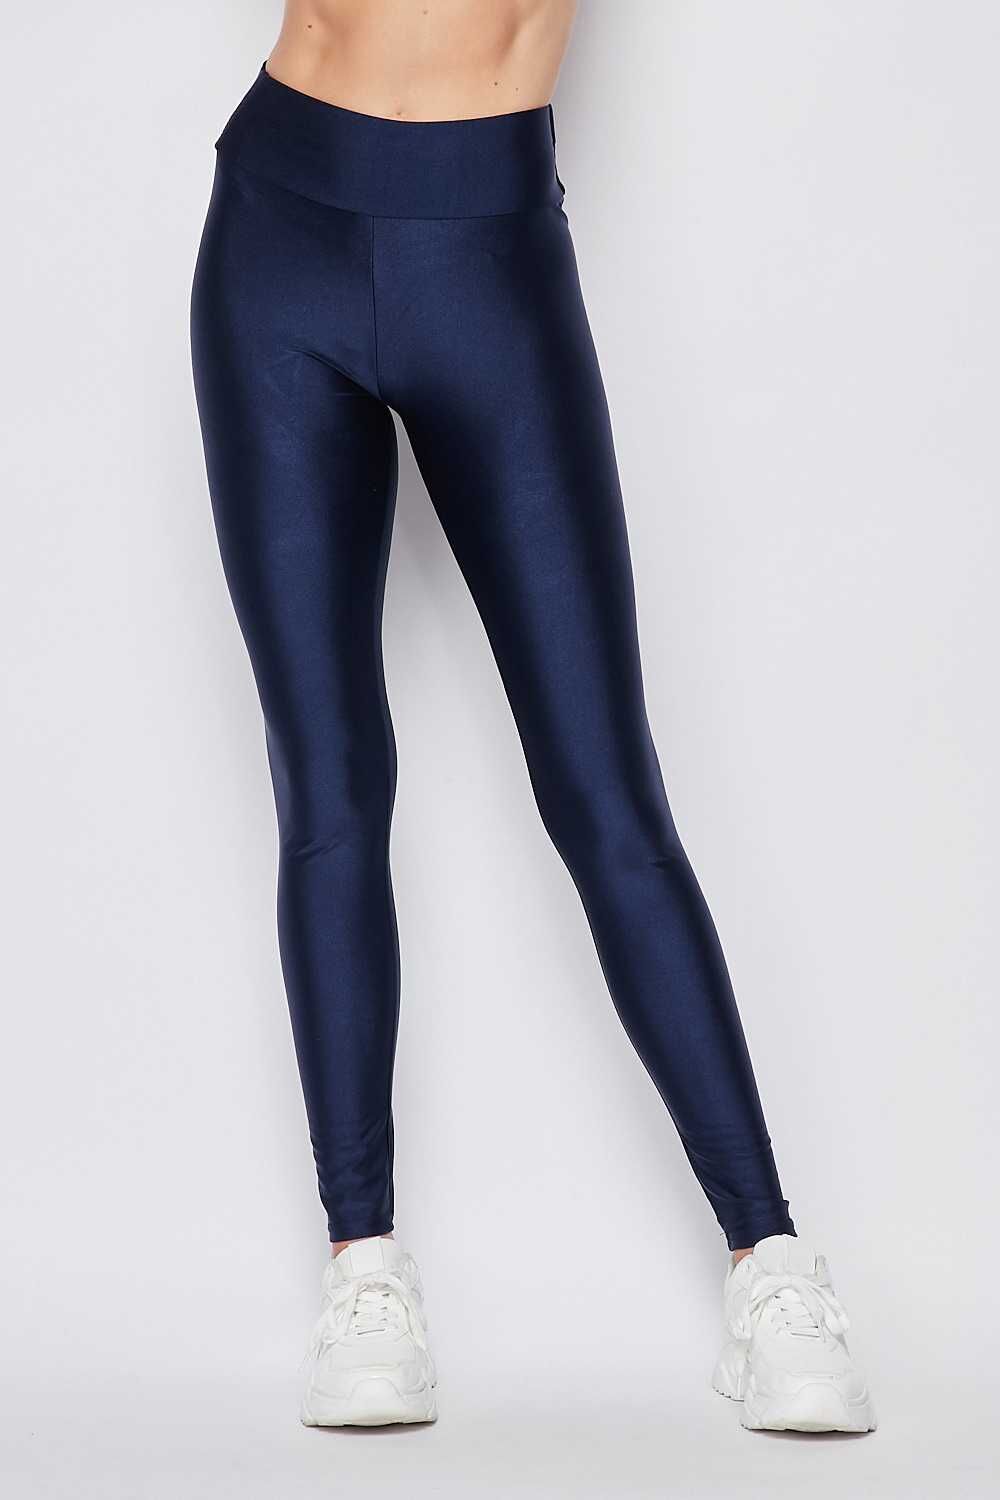 Solid Color 3 Inch High Waisted Shiny Scrunch Butt Lifting Leggings - Its  All Leggings